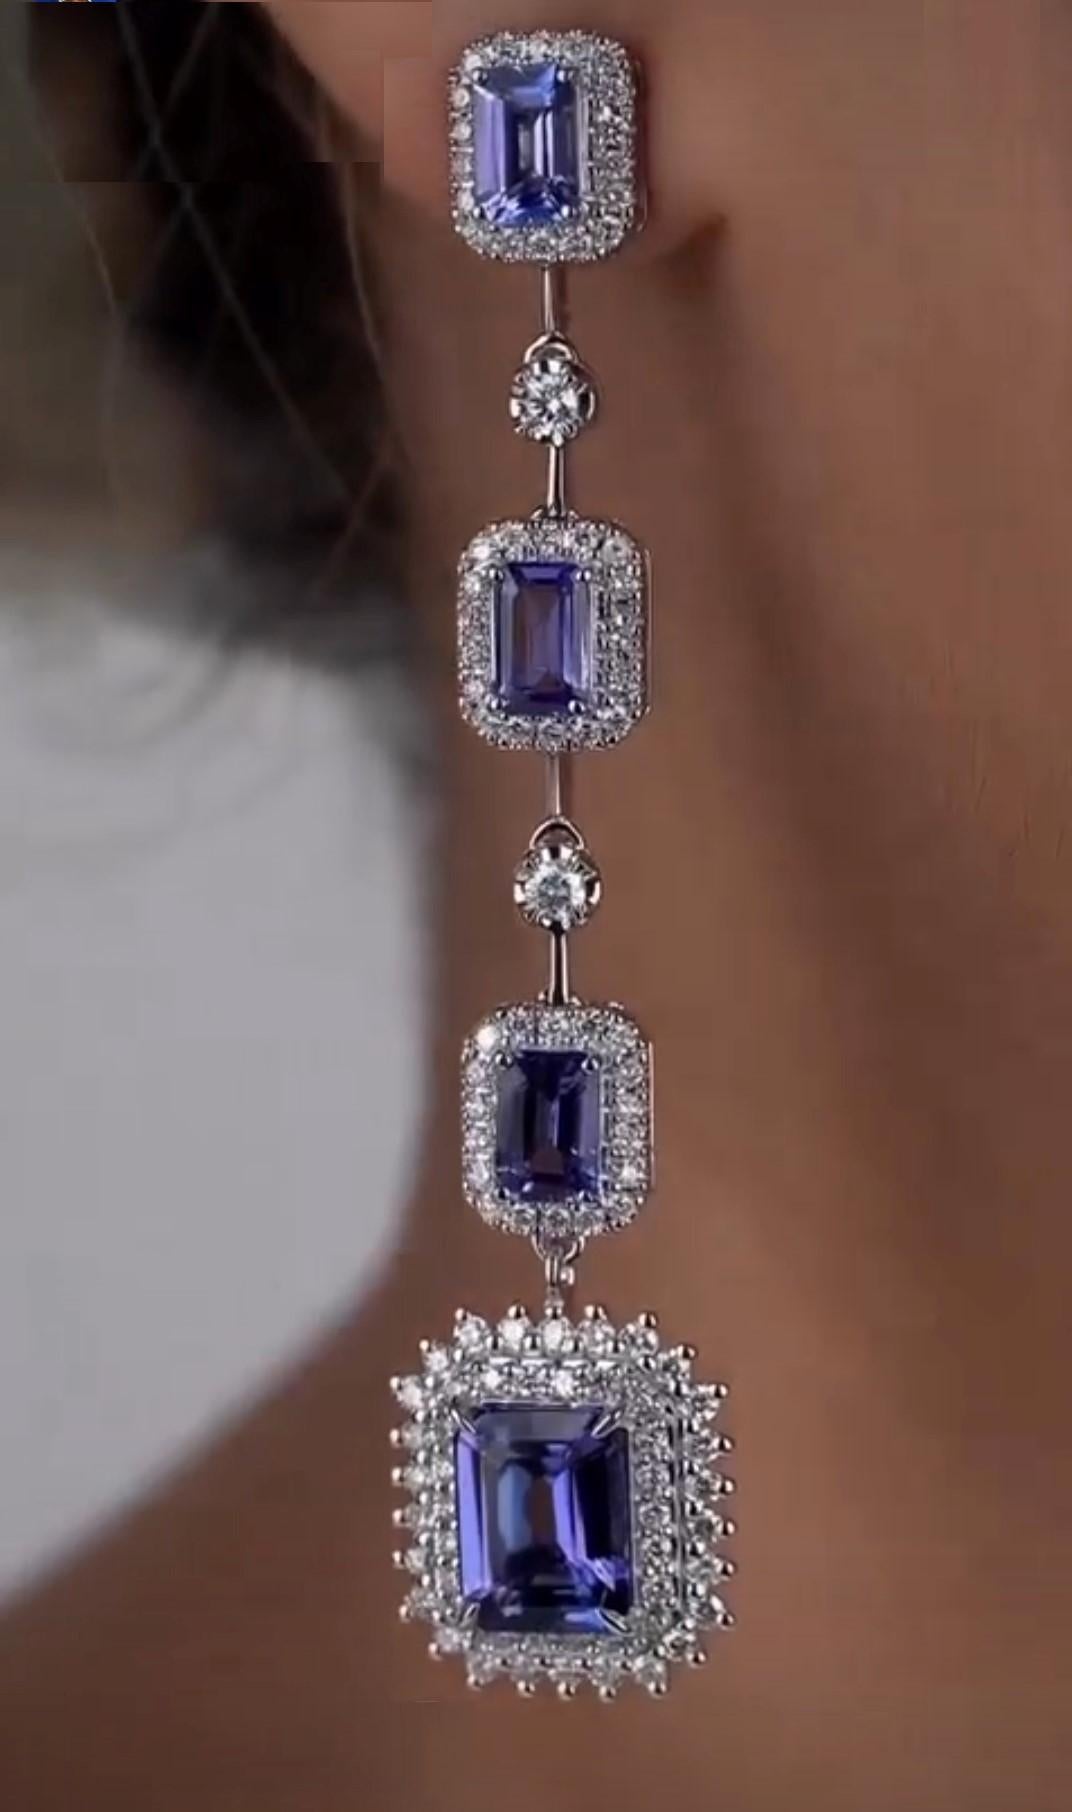 The Following Items we are offering is a Rare Important Radiant Pair of 18KT Gold Large Glistening Magnificent Large Fancy Gorgeous Tanzanite Diamond Dangle Earrings. Stones are Very Clean and Extremely Fine! Approx Over 10CTS!!! 
These Magnificent